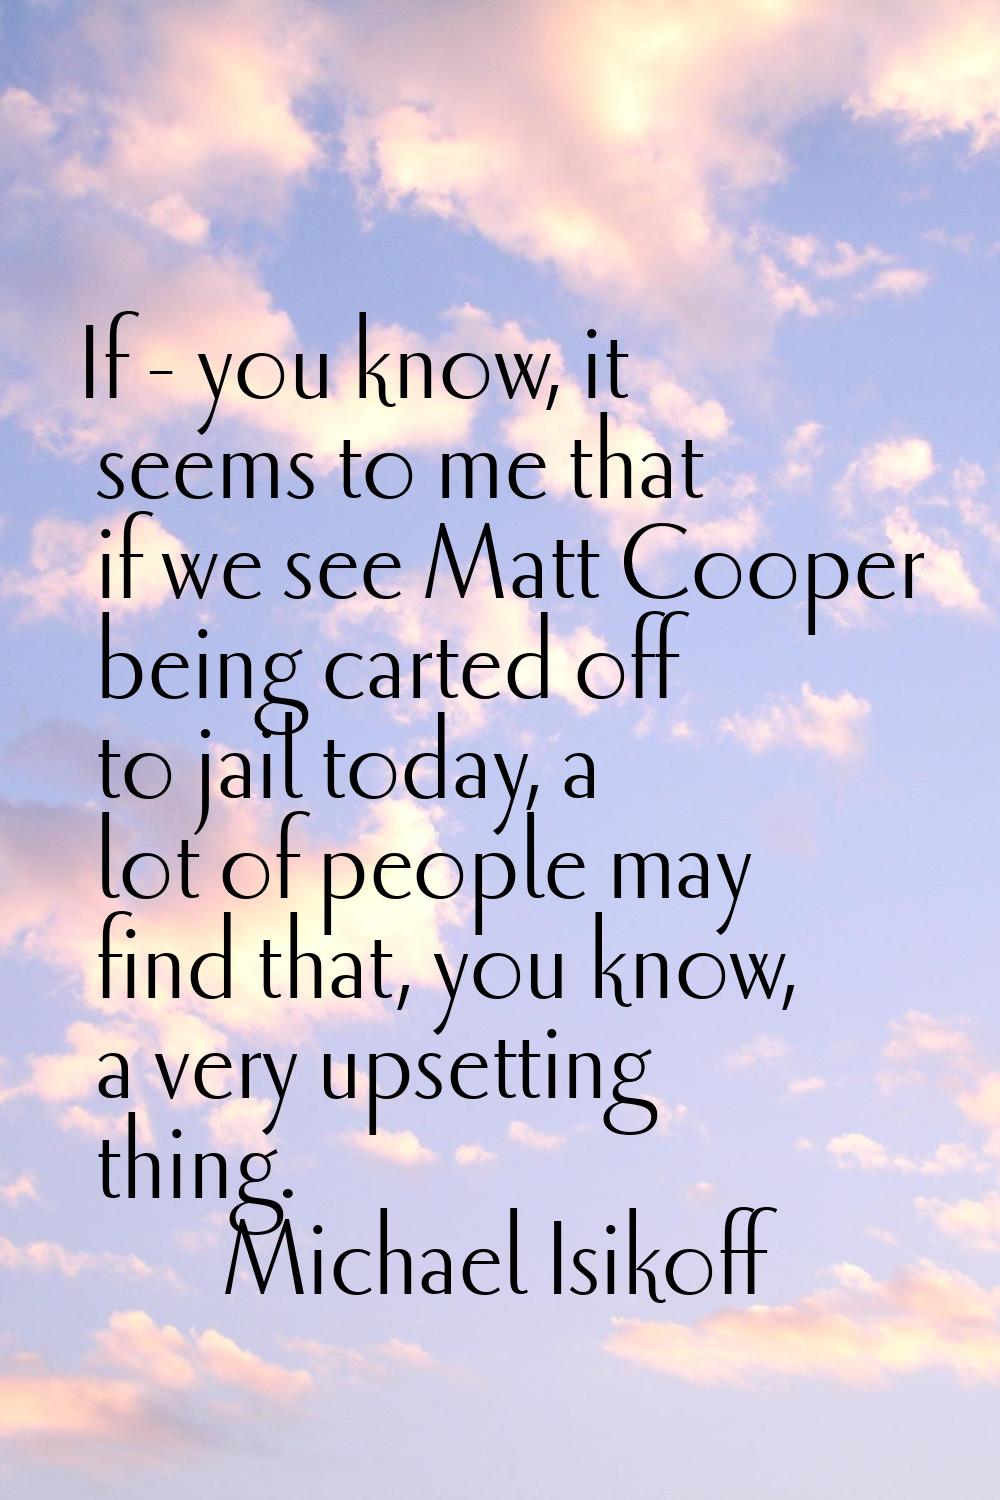 If - you know, it seems to me that if we see Matt Cooper being carted off to jail today, a lot of p